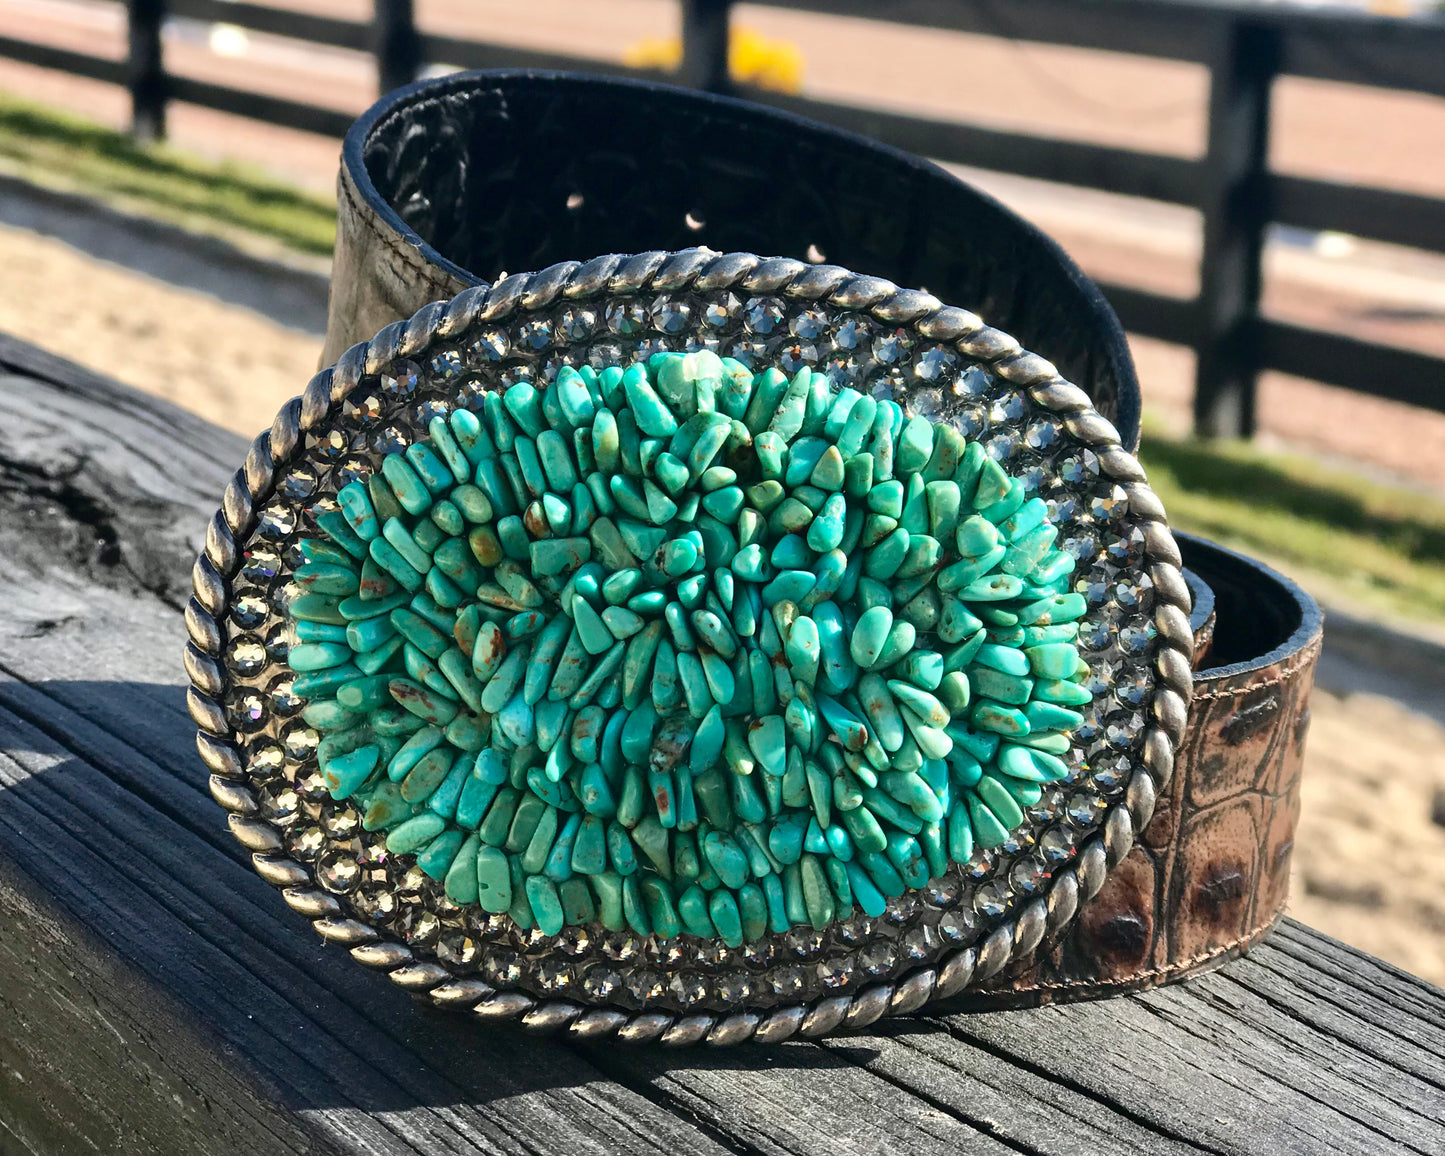 The Stoned Turquoise and Black Diamond XL